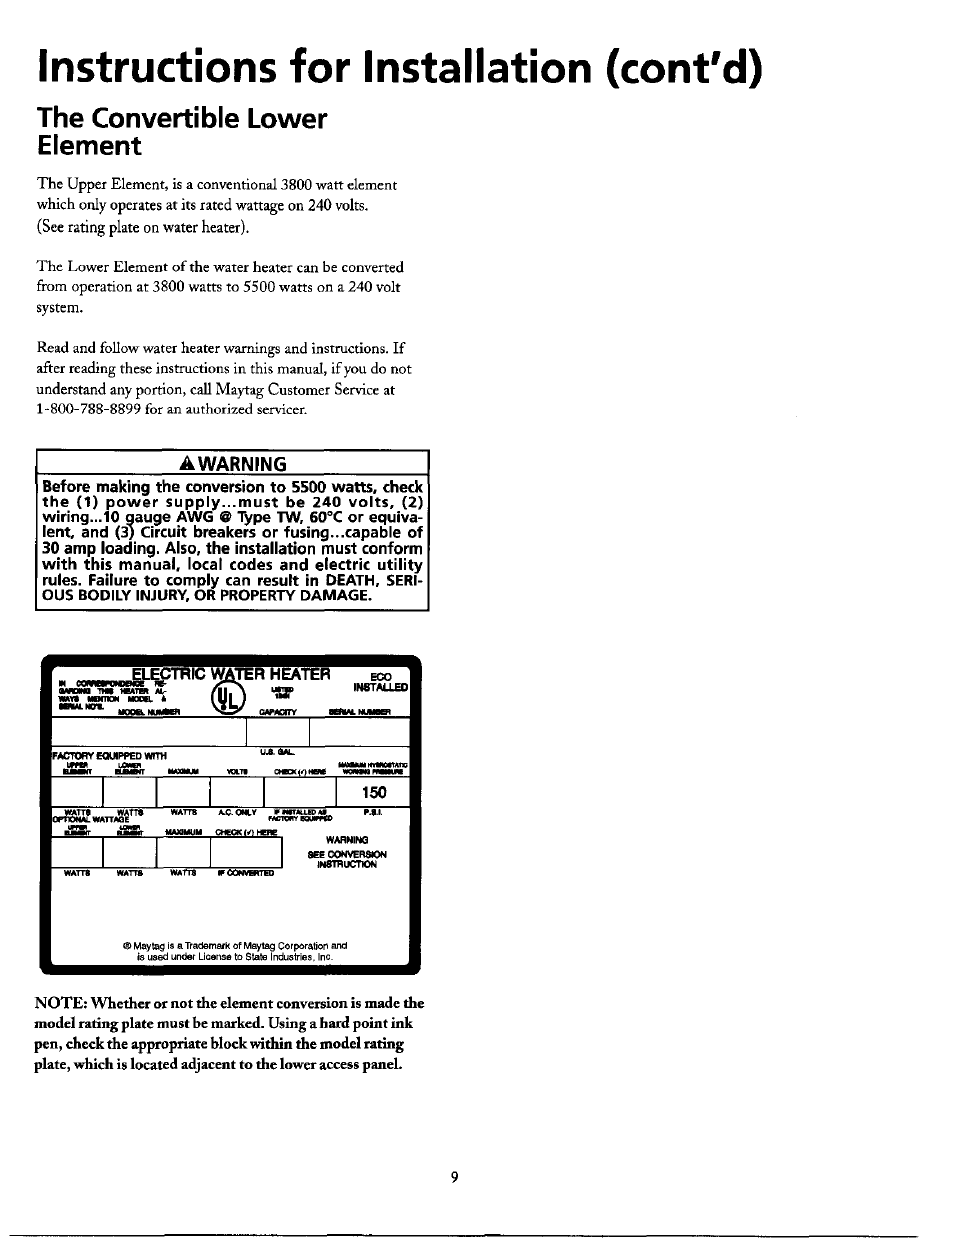 The convertible lower element, Instructions for installation (cont'd), Electric water heater | Mctory boupfed | Maytag HE21250PC User Manual | Page 9 / 40